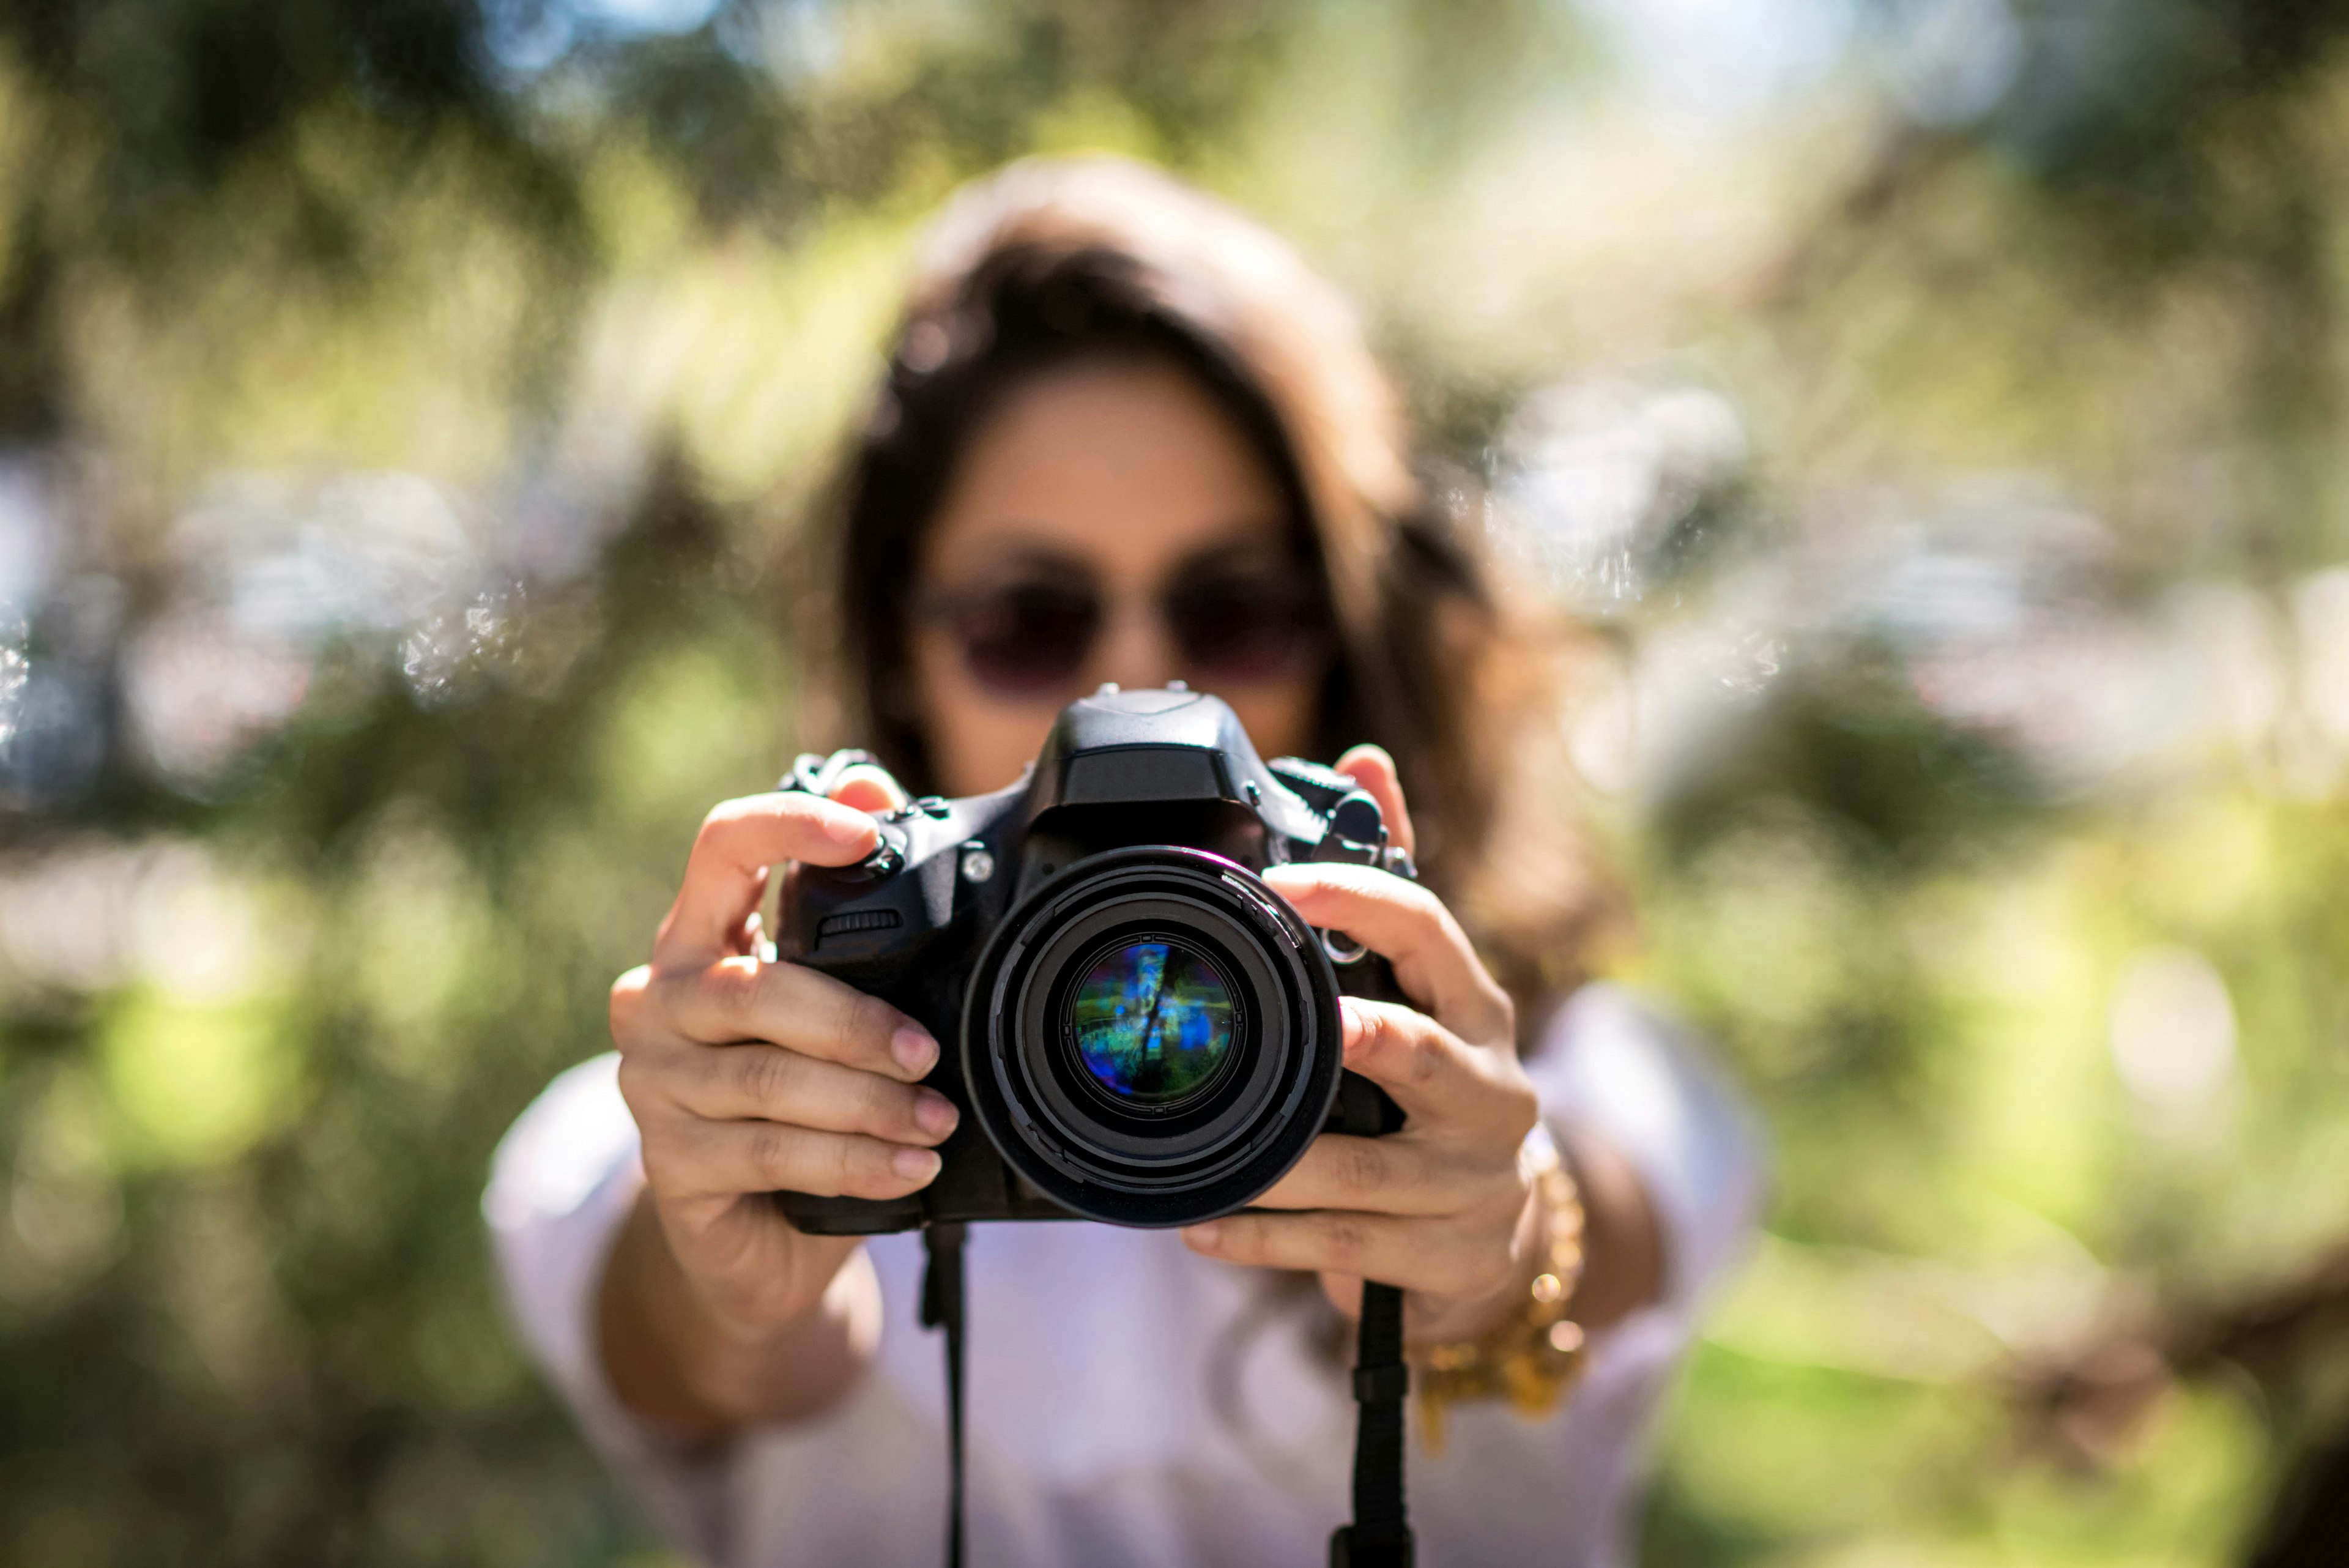 A brunette woman wearing sunglasses holds a DSLR camera in front of her.